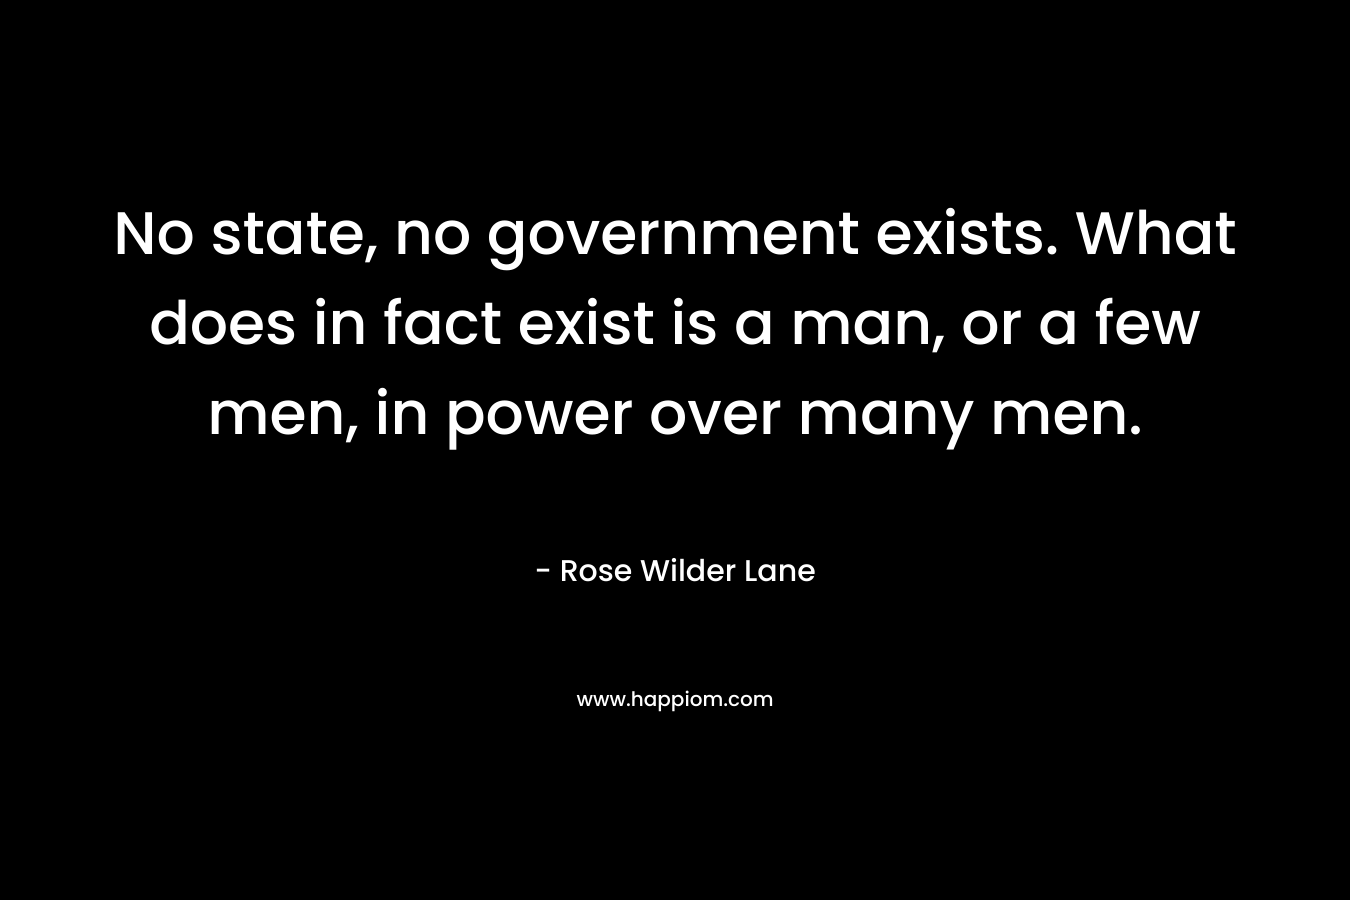 No state, no government exists. What does in fact exist is a man, or a few men, in power over many men.